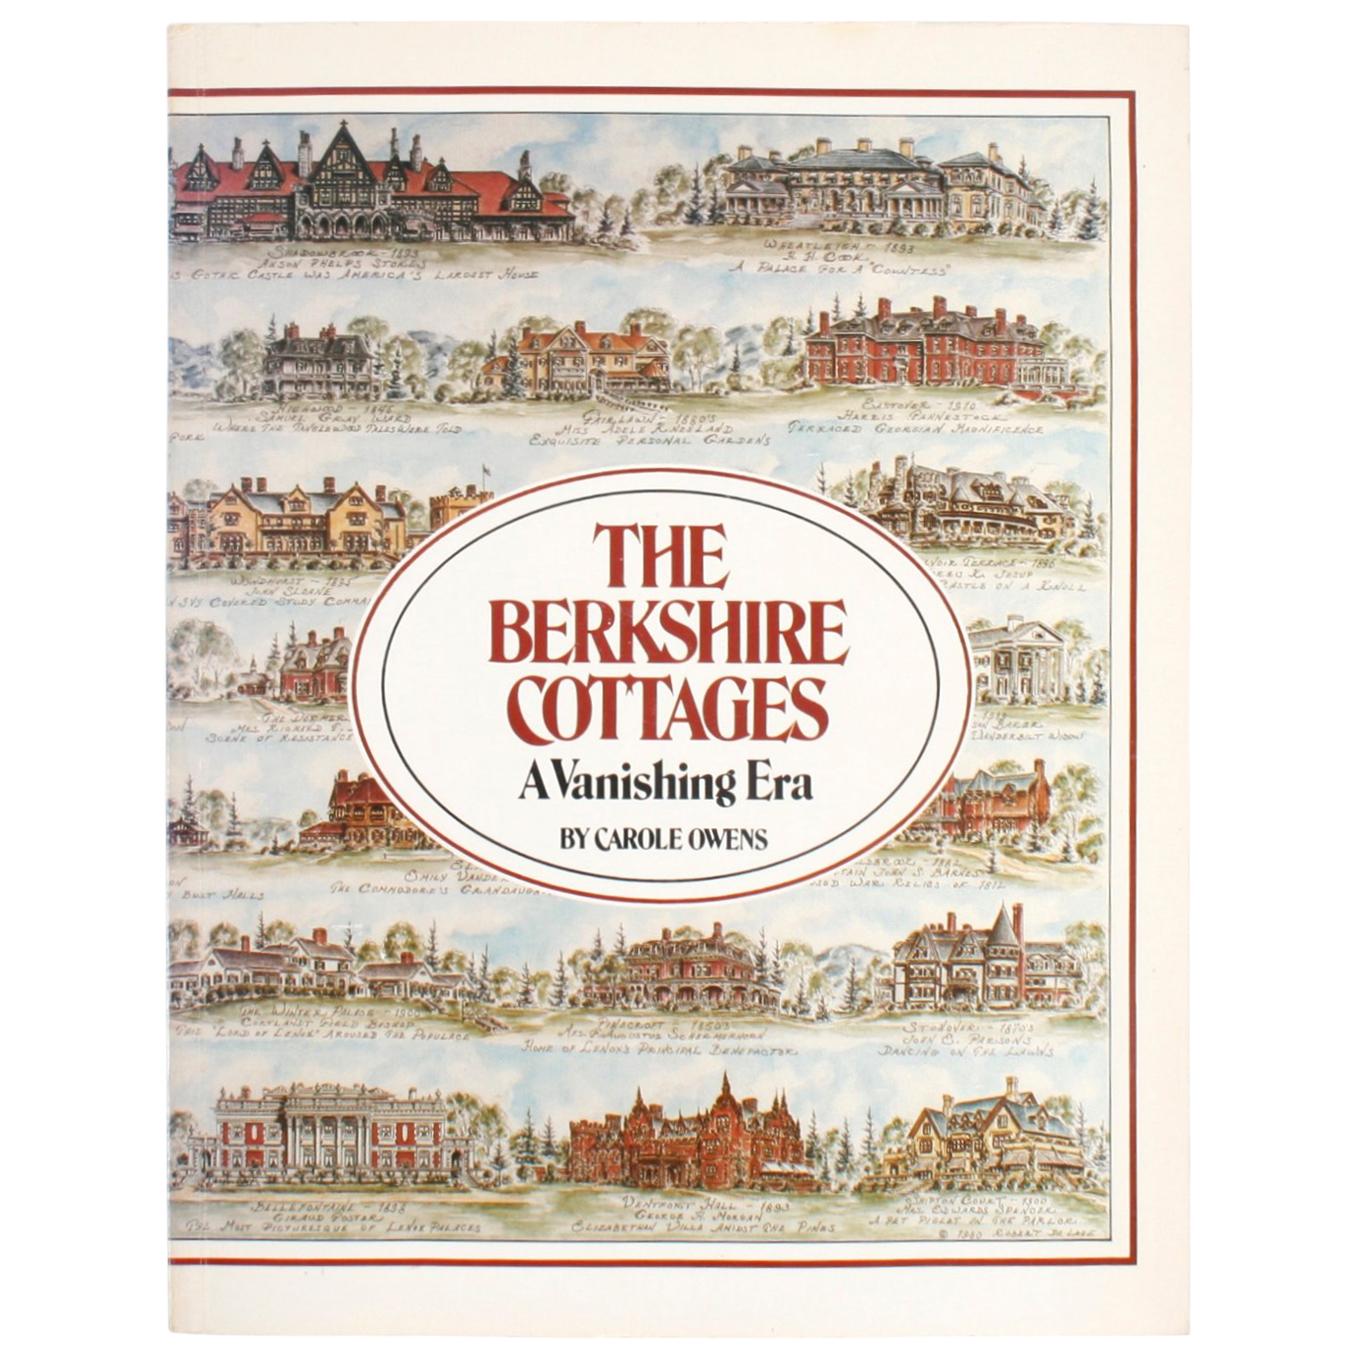 Berkshire Cottages, a Vanishing Era by Carole Owens, First Edition